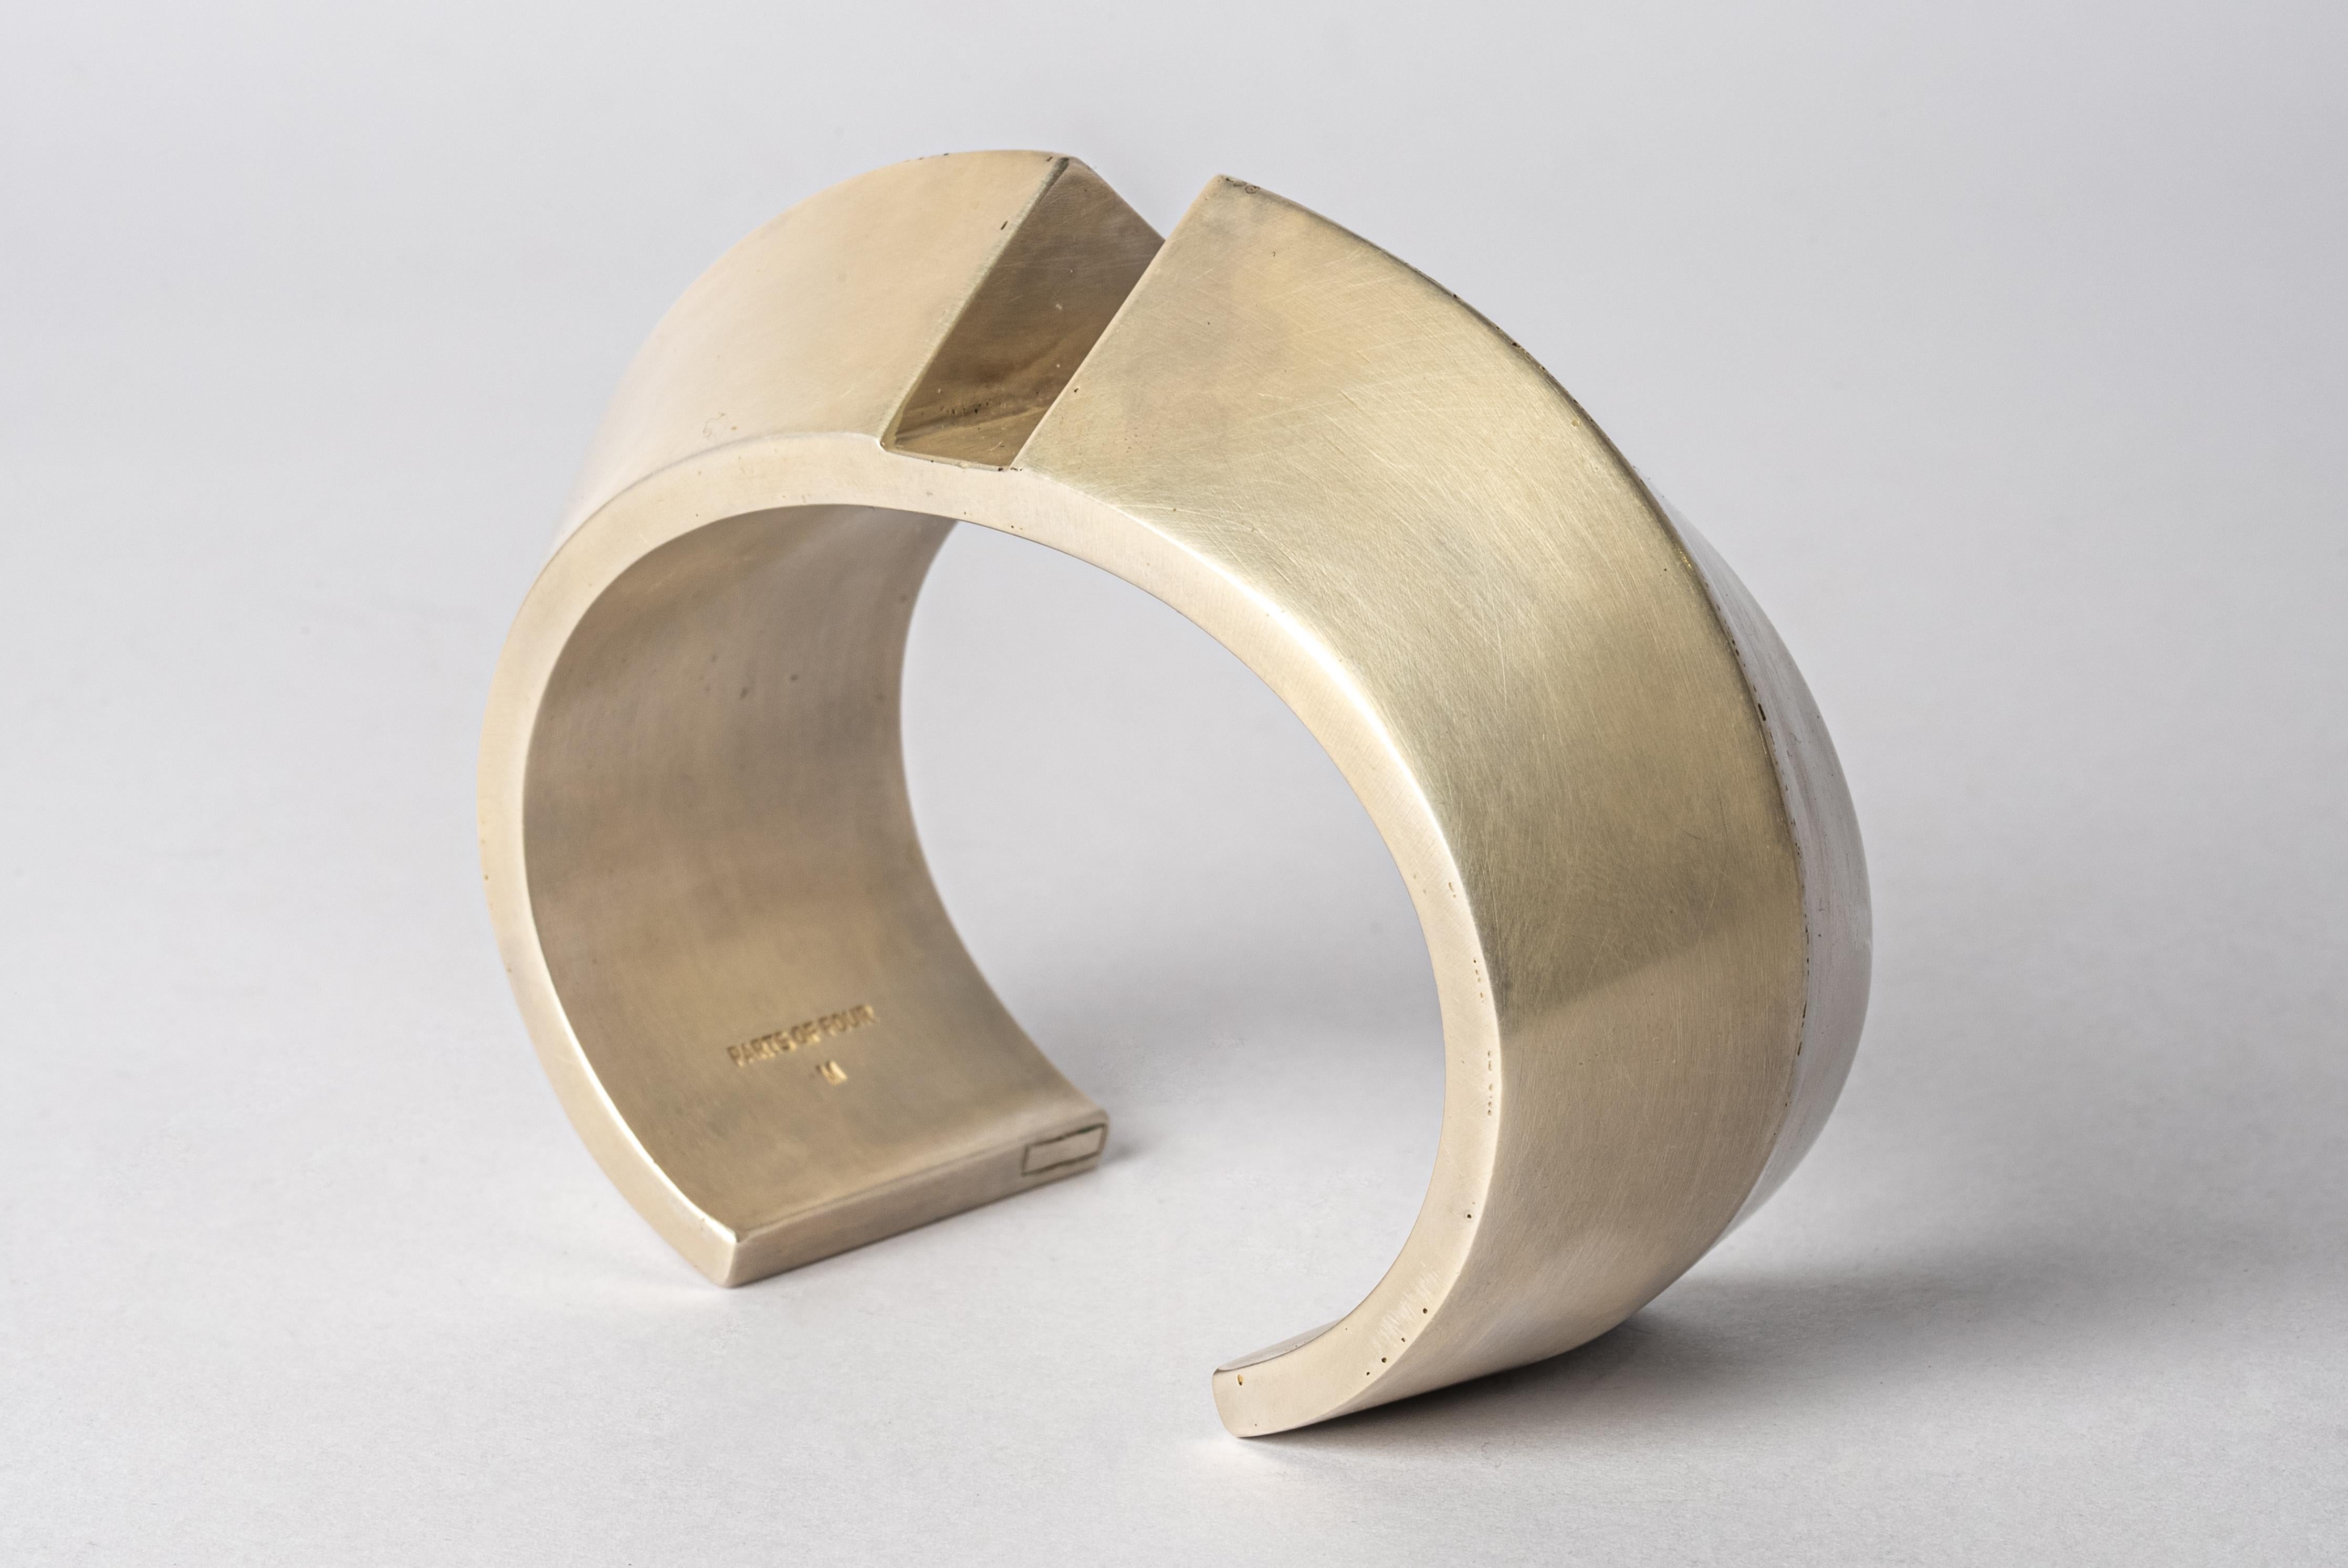 Bracelet in acid treated silver plated brass. This piece is 100% hand fabricated from metal plate; cut into sections and soldered together to make the hollow three dimensional form. If sterling silver, the sheet metal is made by hand. The silver is